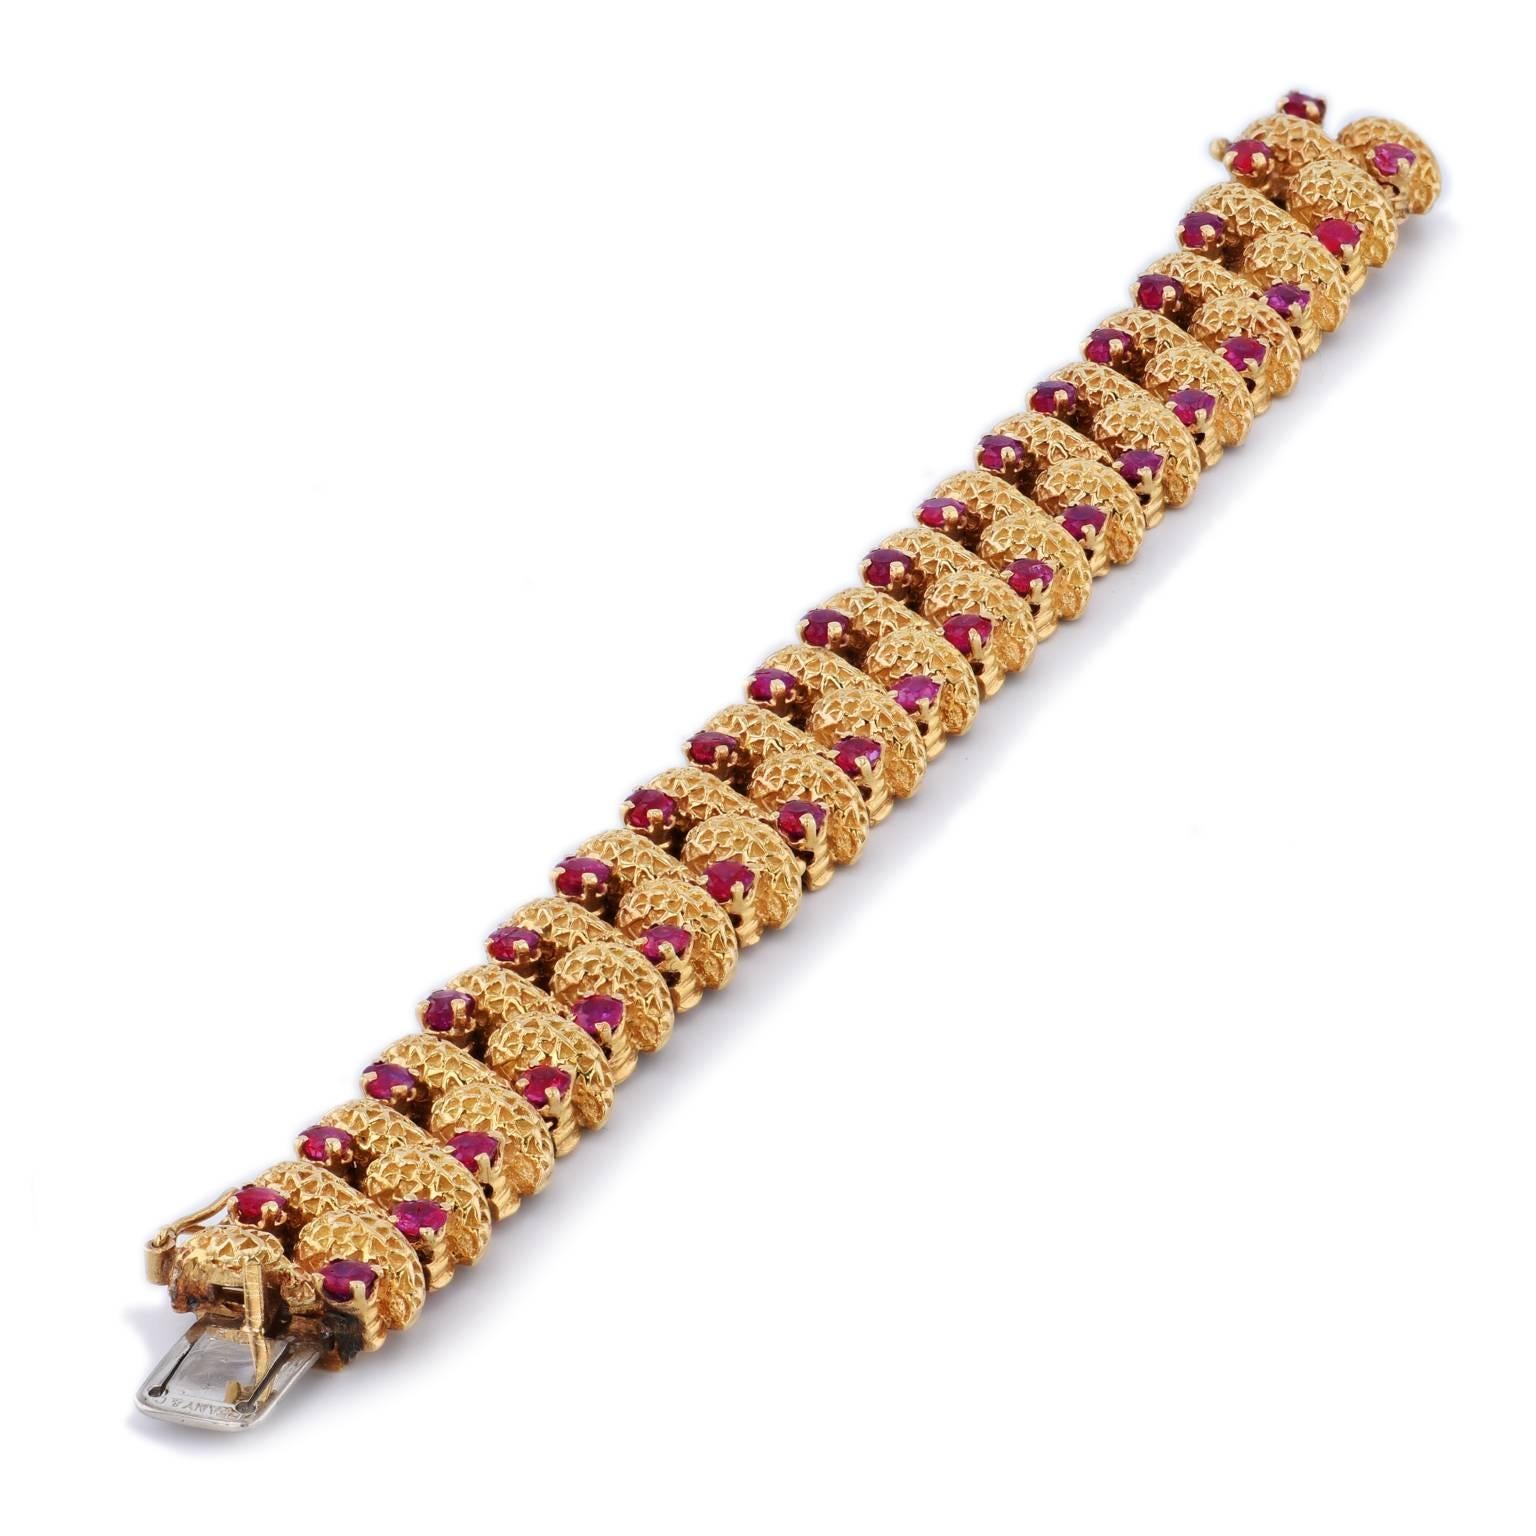 Be blown away by this vintage 1960s Tiffany & Co. ruby bracelet fashioned in 18 karat yellow gold. A find of this magnitude is truly a treasure to behold. Make this piece yours.